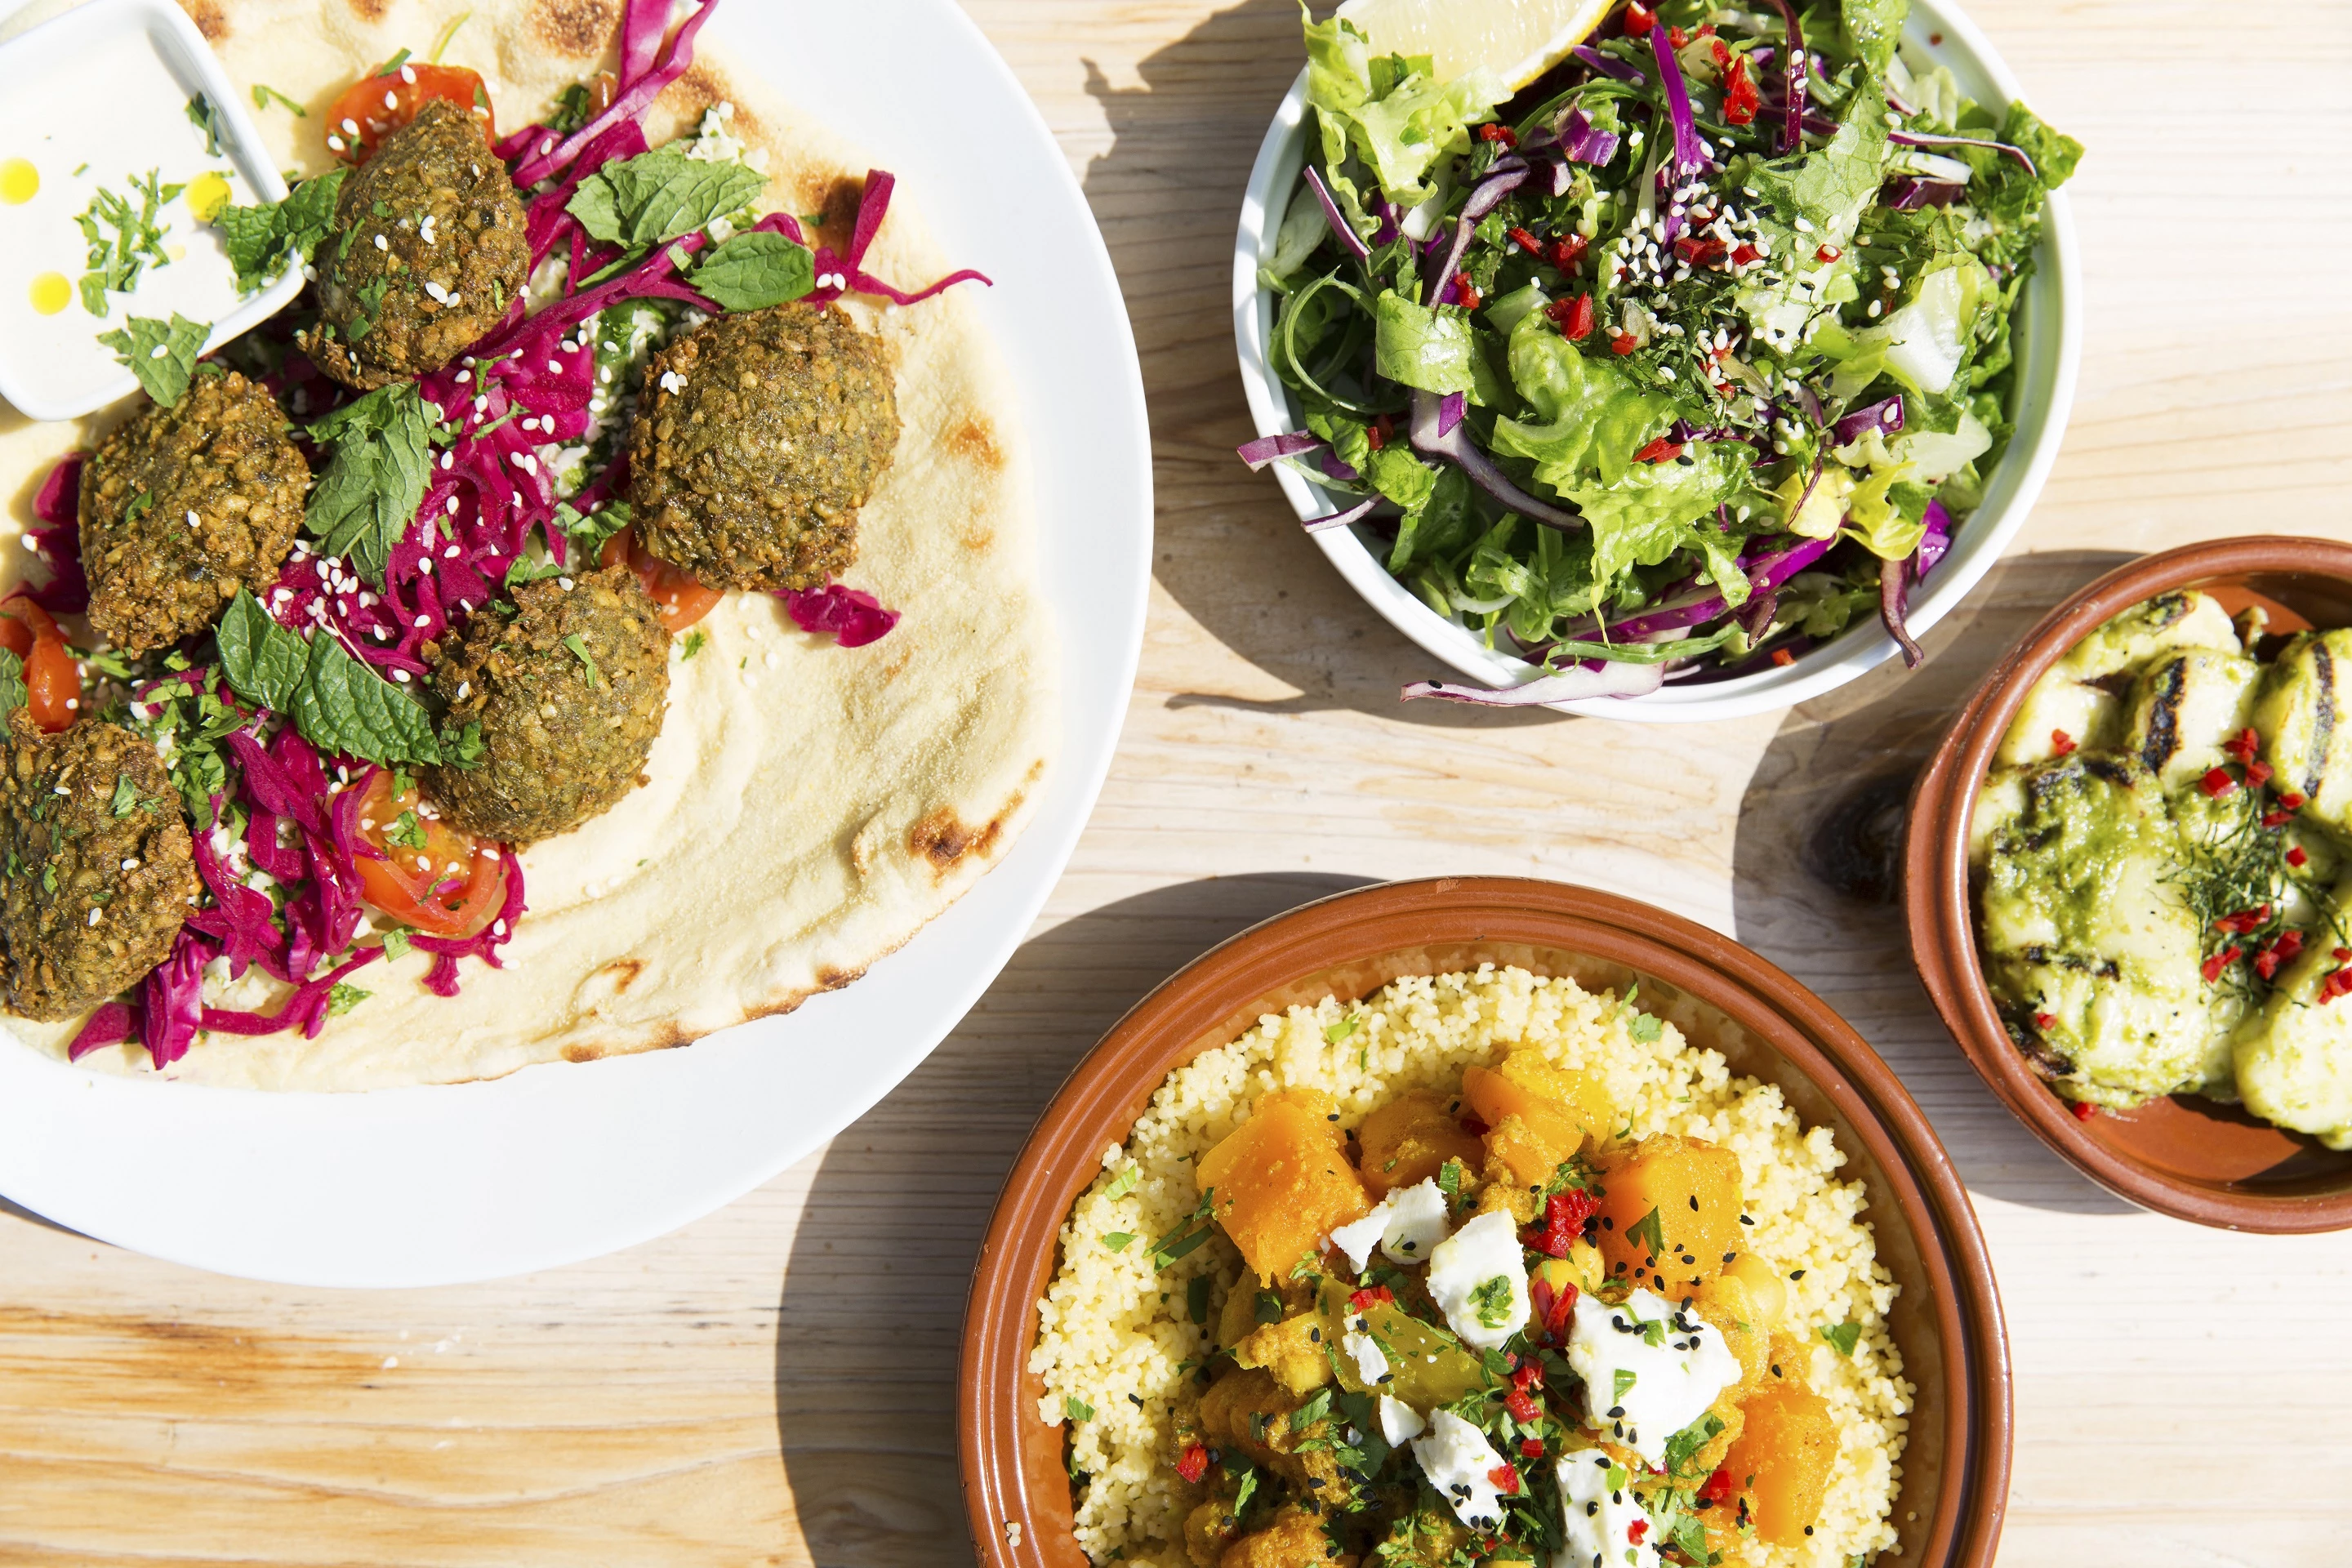 Social enterprise Harissa in Newcastle has launched a healthier Mediterranean and Middle Eastern takeout menu 